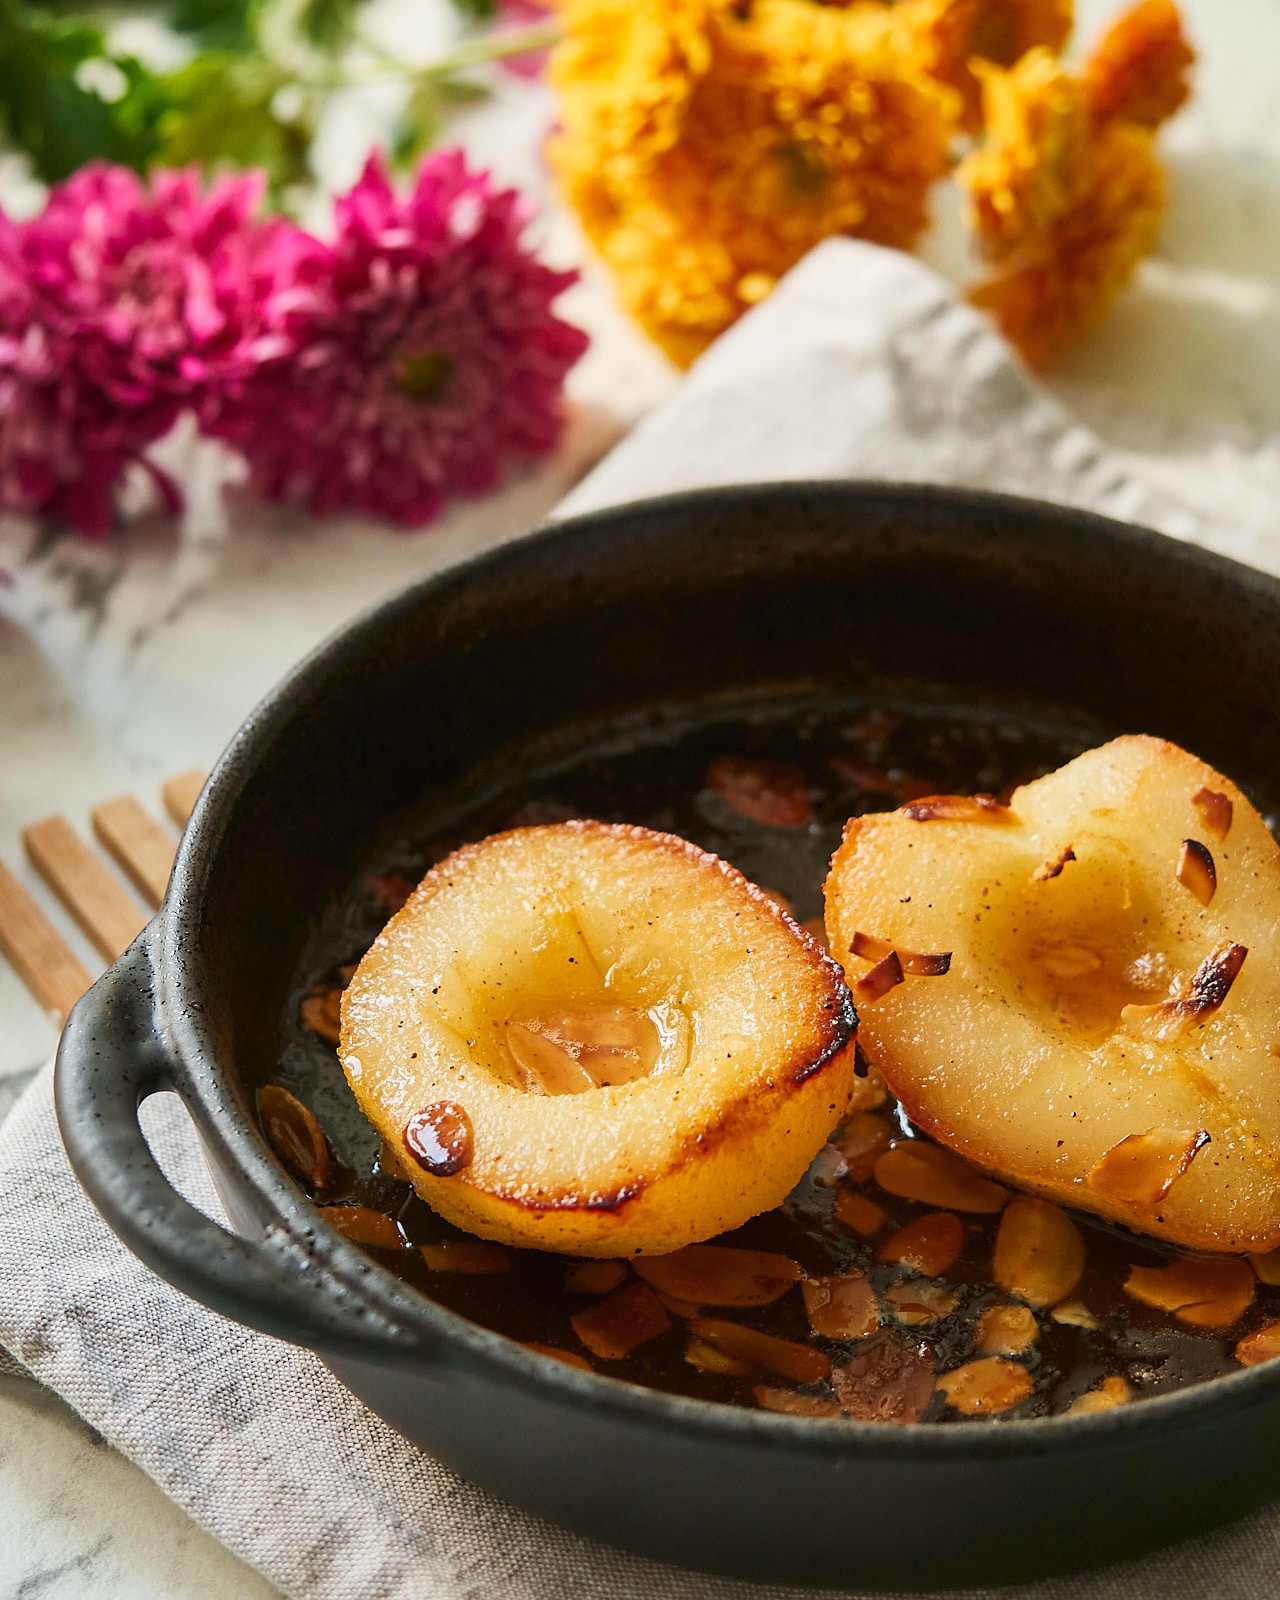 Roasted Pears with Cashew Sauce